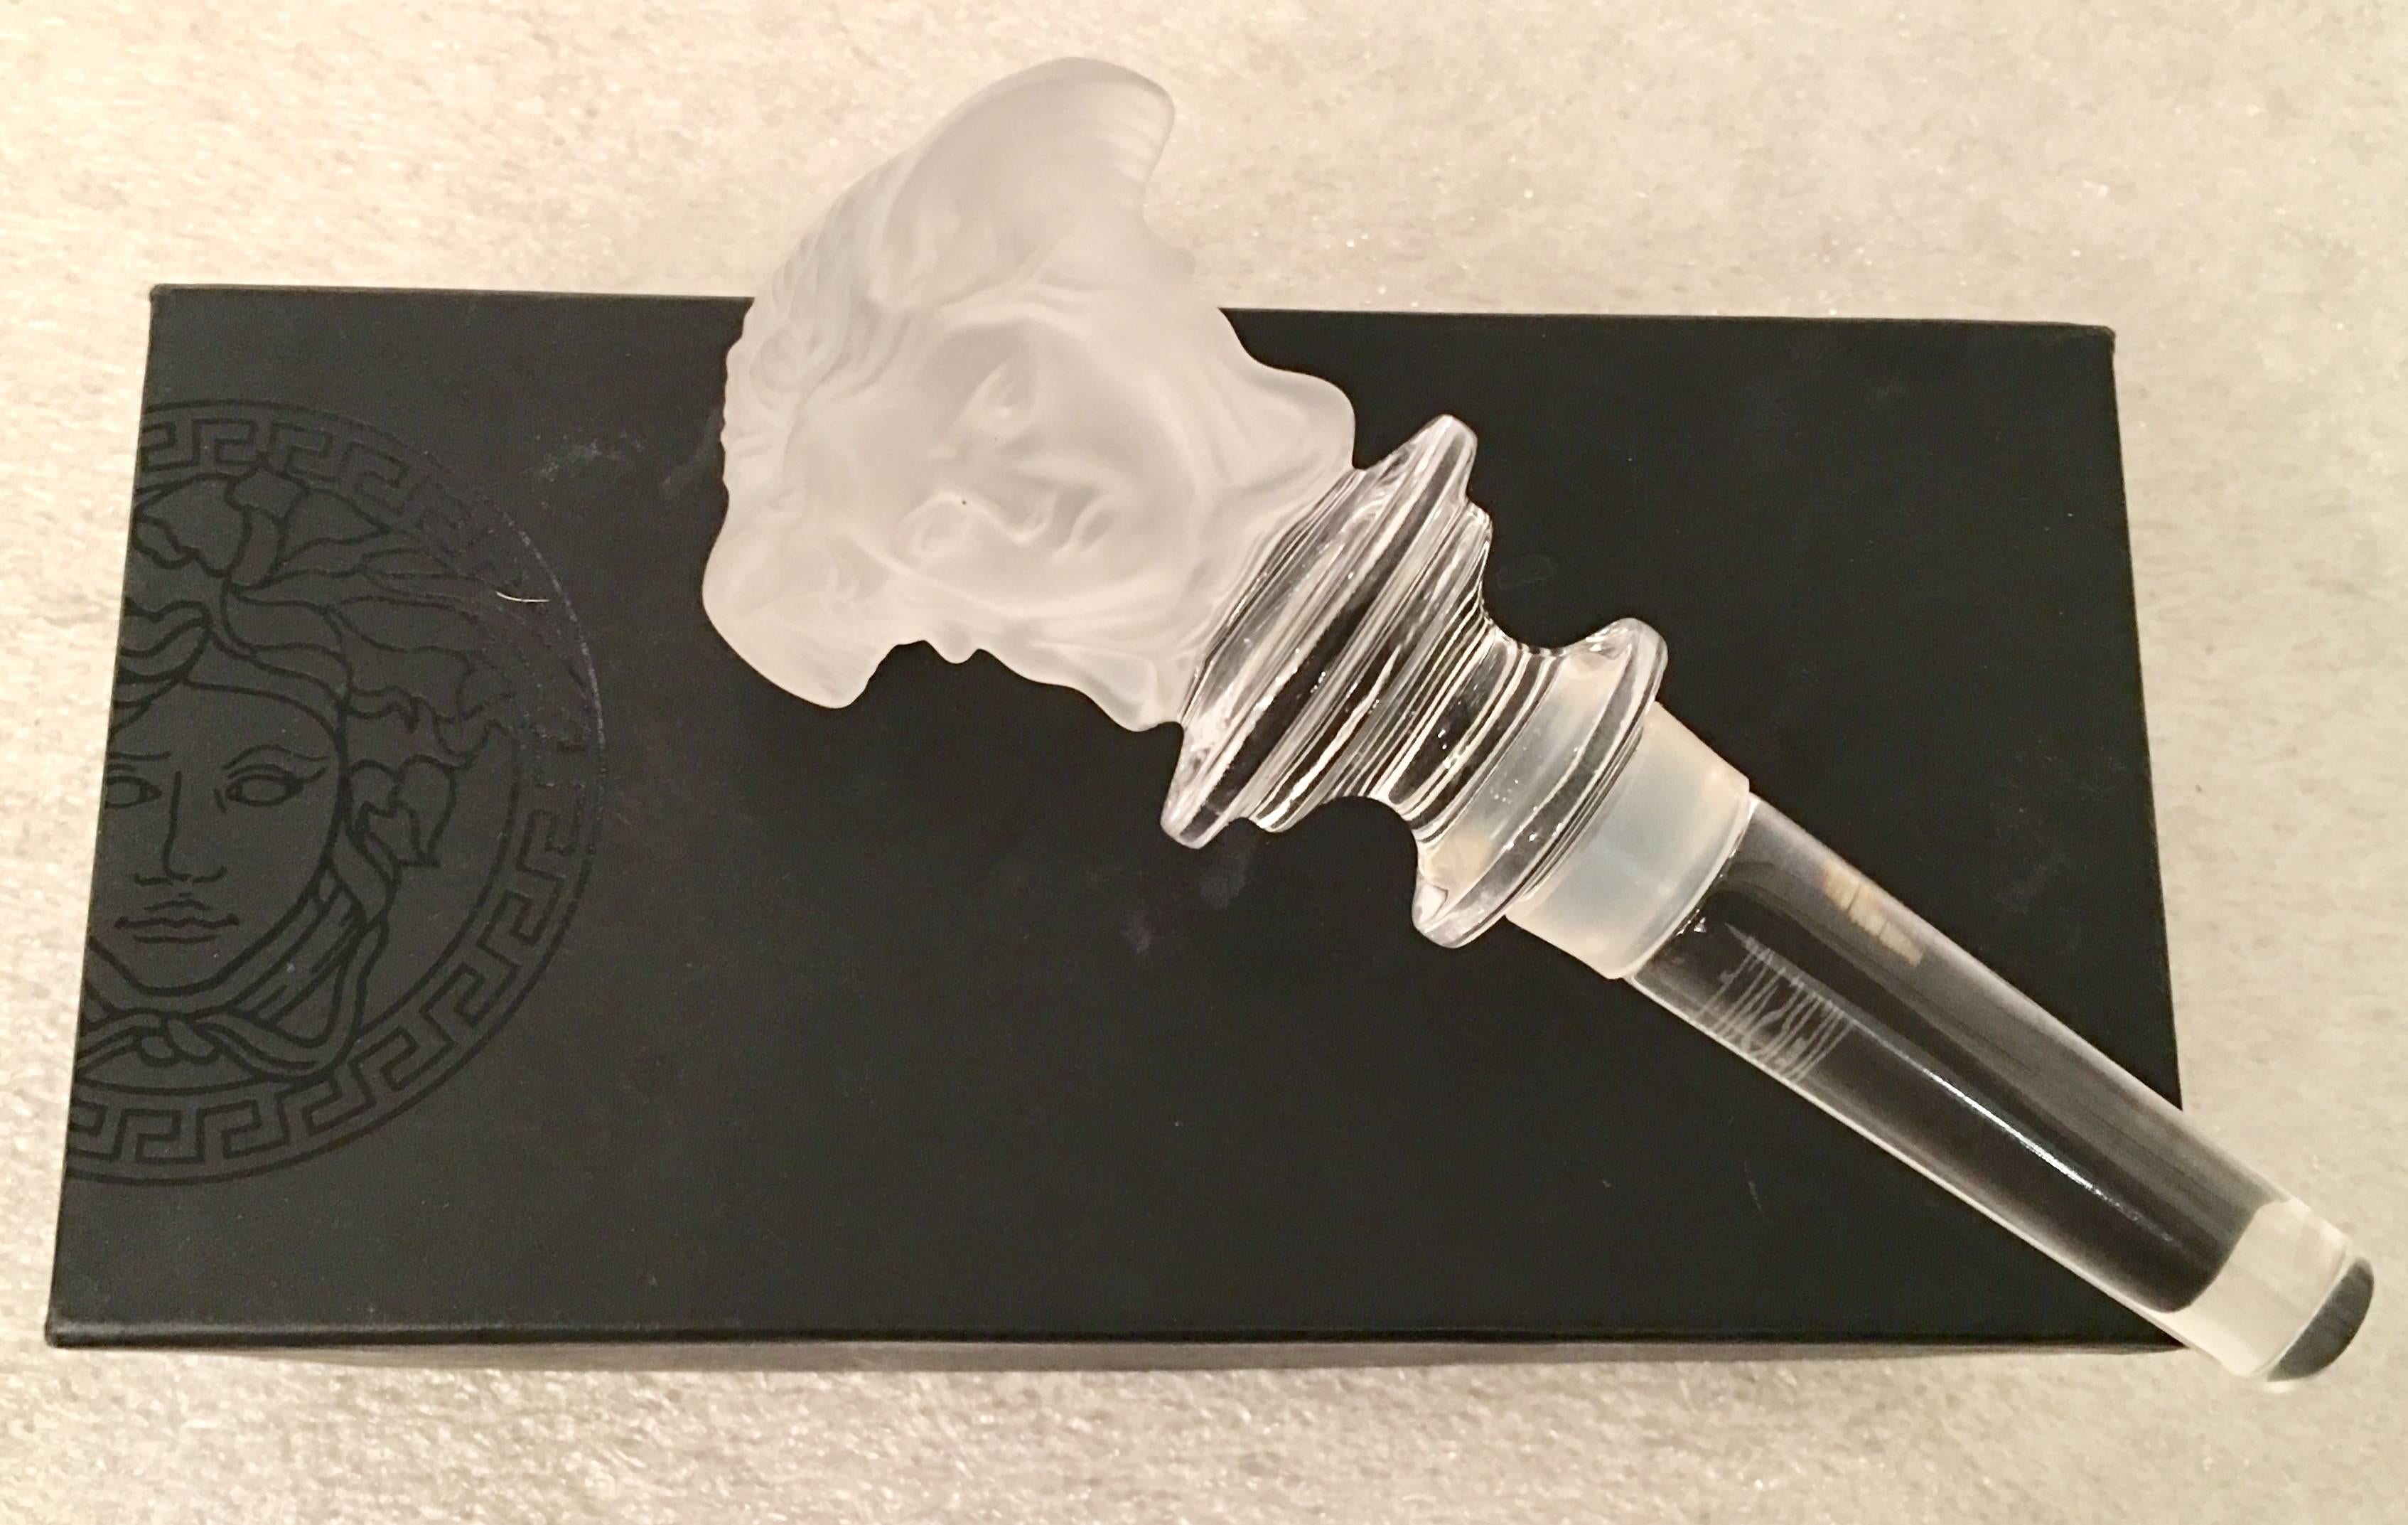 Crystal clear and frosted medusa head bottle stopper by Rosenthal for Versace.
Includes original Versace protective gift box. This piece is signed on the clear stem.